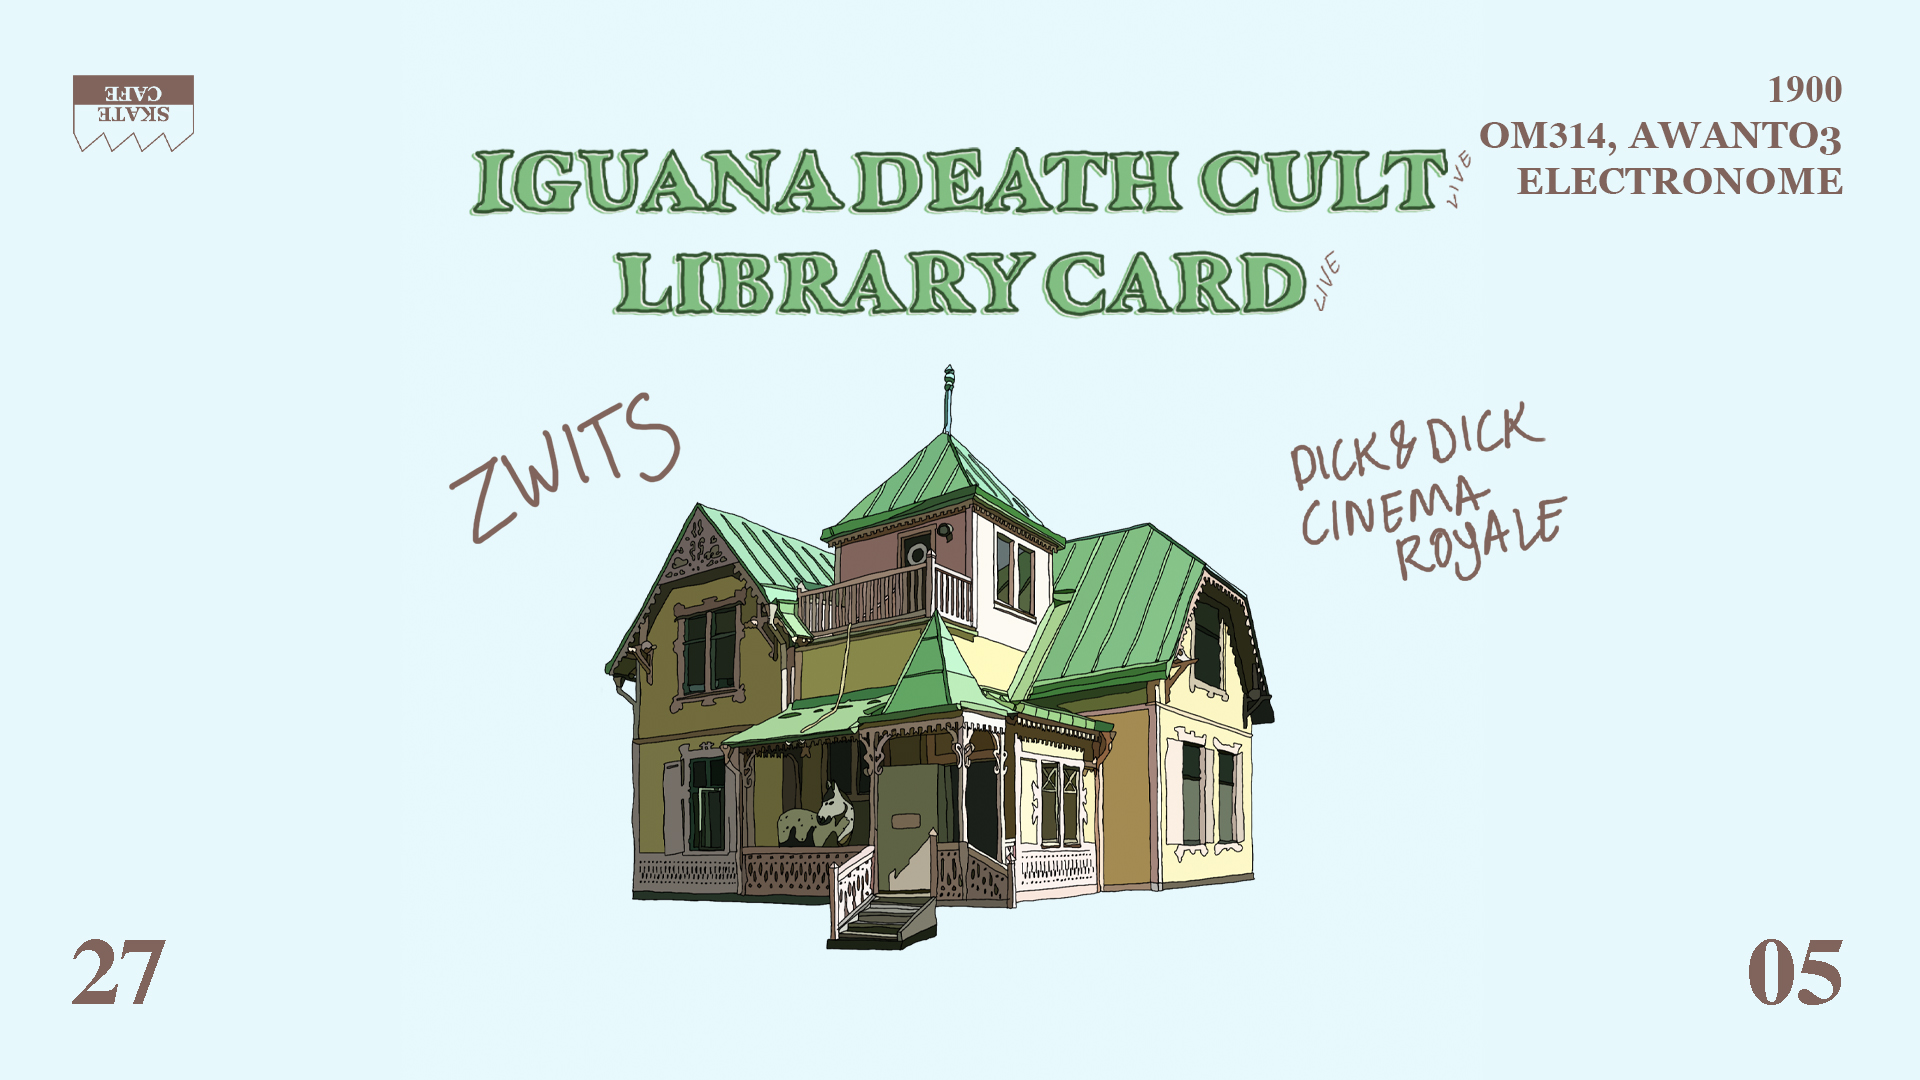 ZATERDAG: IGUANA DEATH CULT (live), LIBRARY CARD (live), ZWITS, AWANTO3, ELECTRONOME, OM314, CINEMA ROYALE header